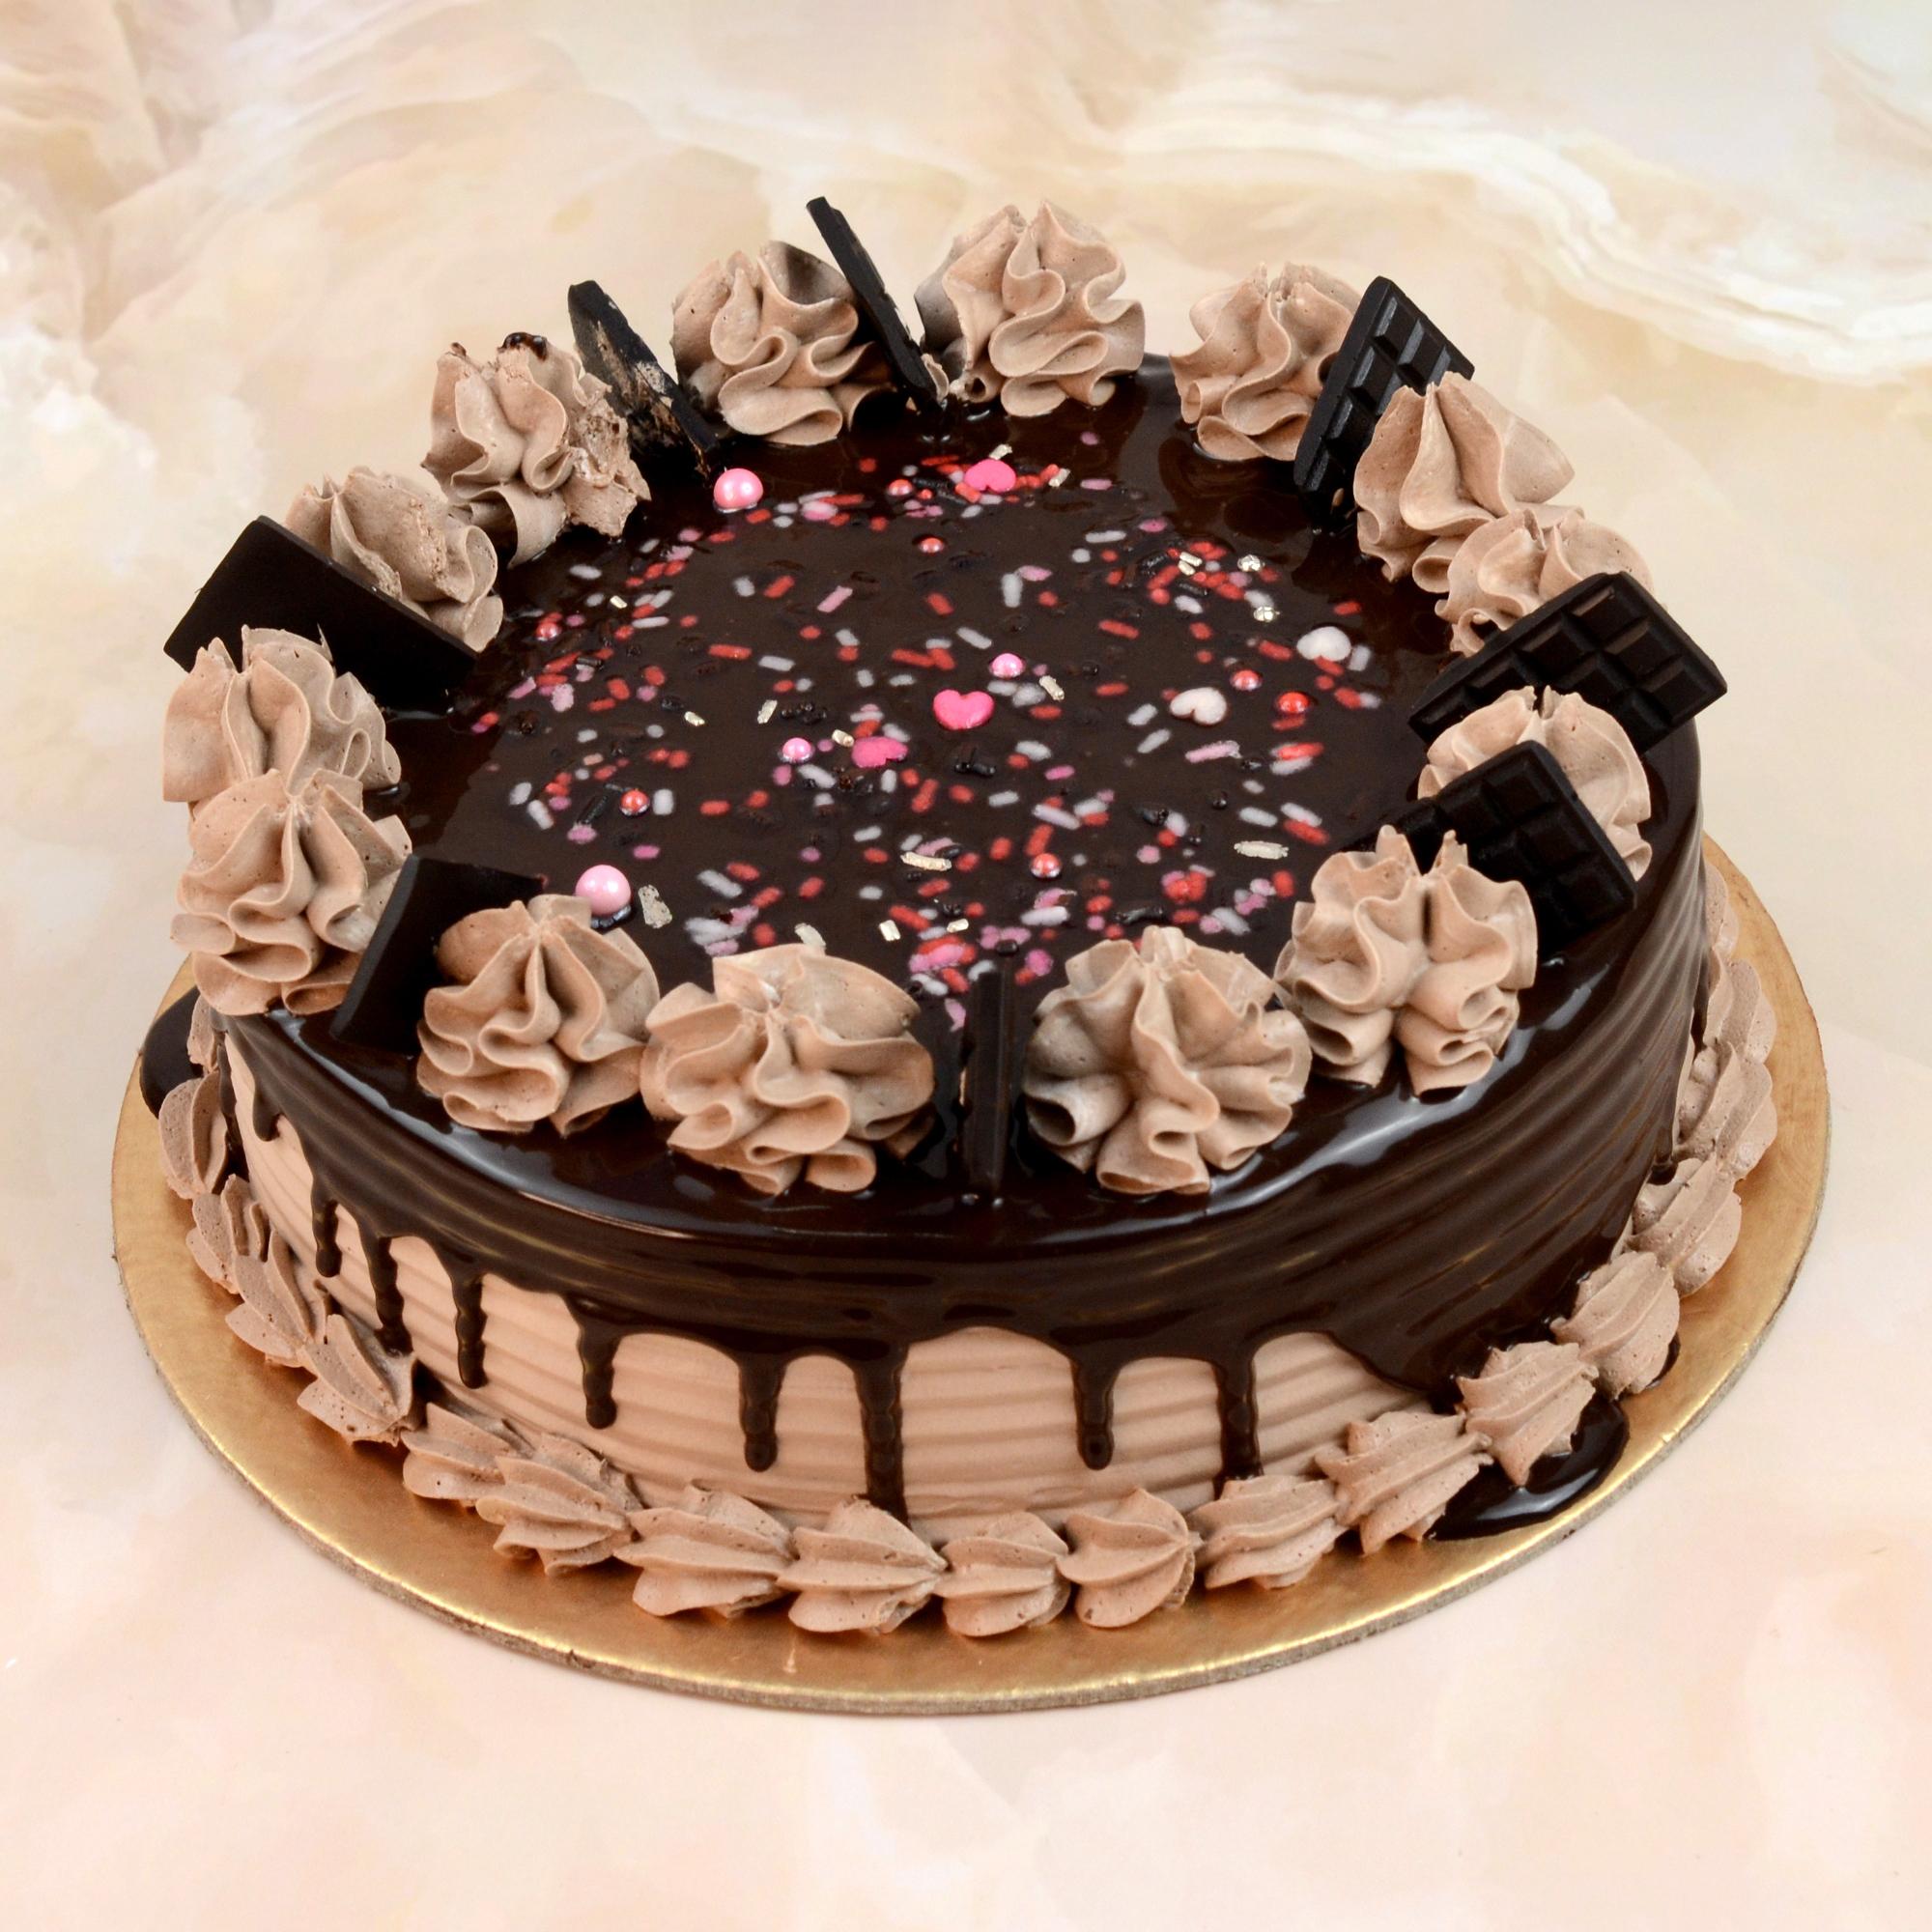 Top Cake Delivery Services in Kottayam - Best Online Cake Delivery Services  - Justdial